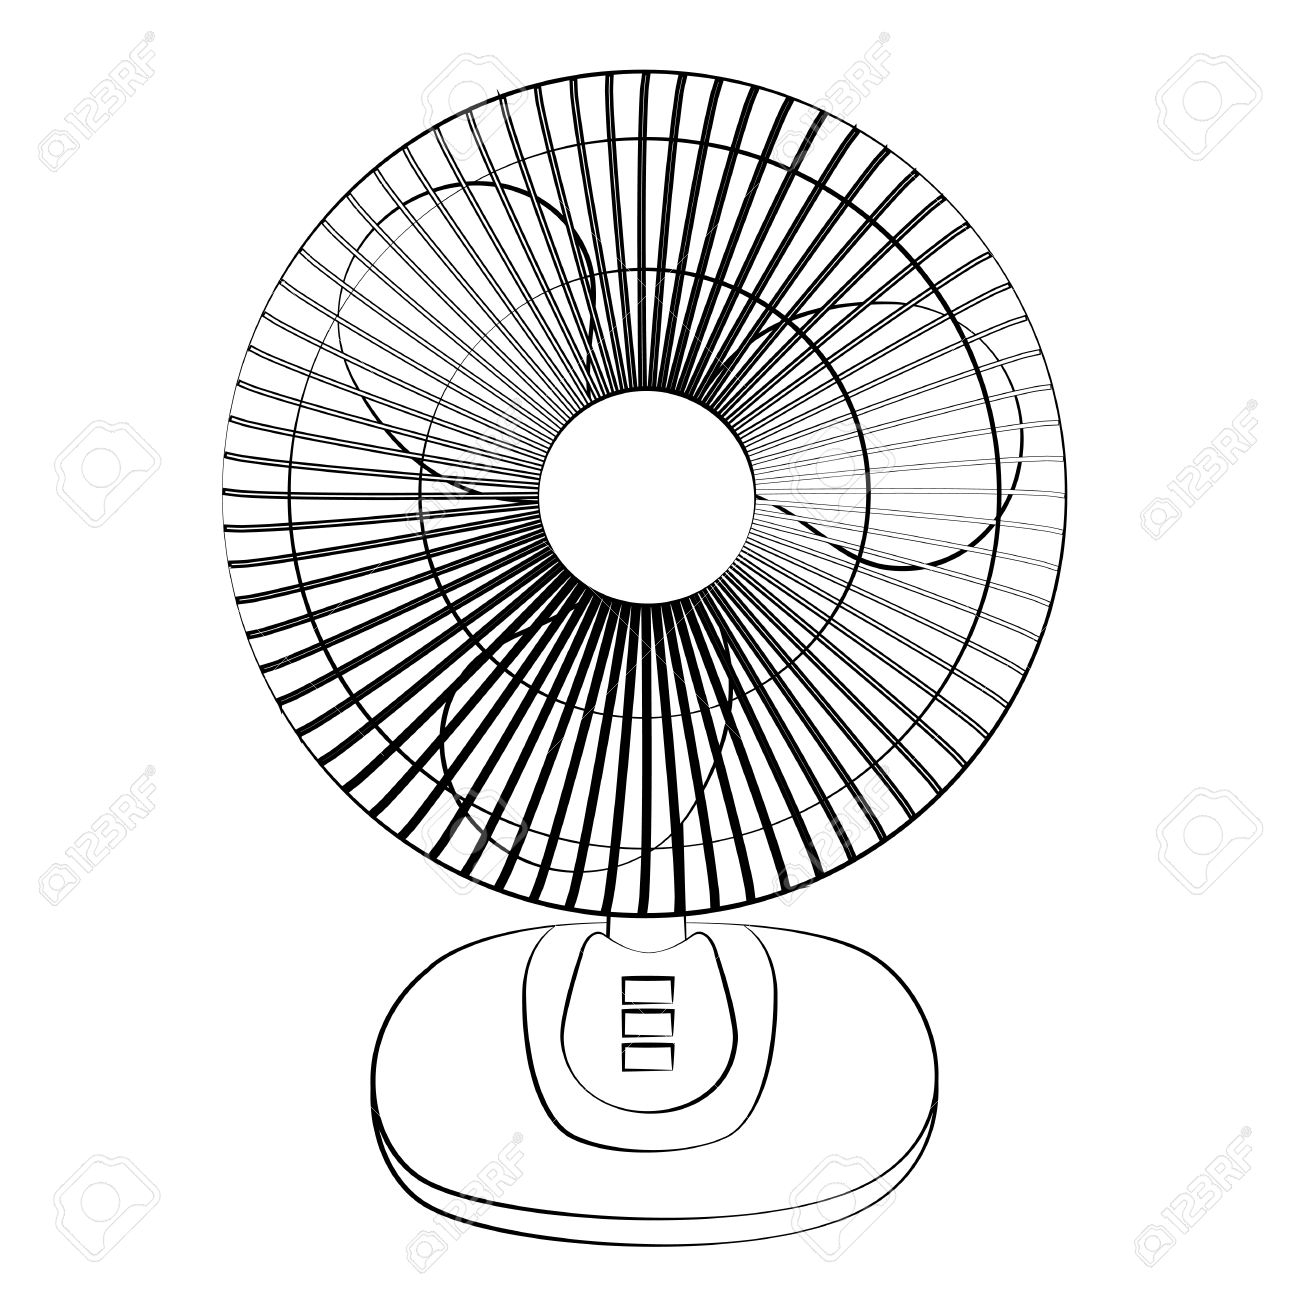 Table fan clipart black and white